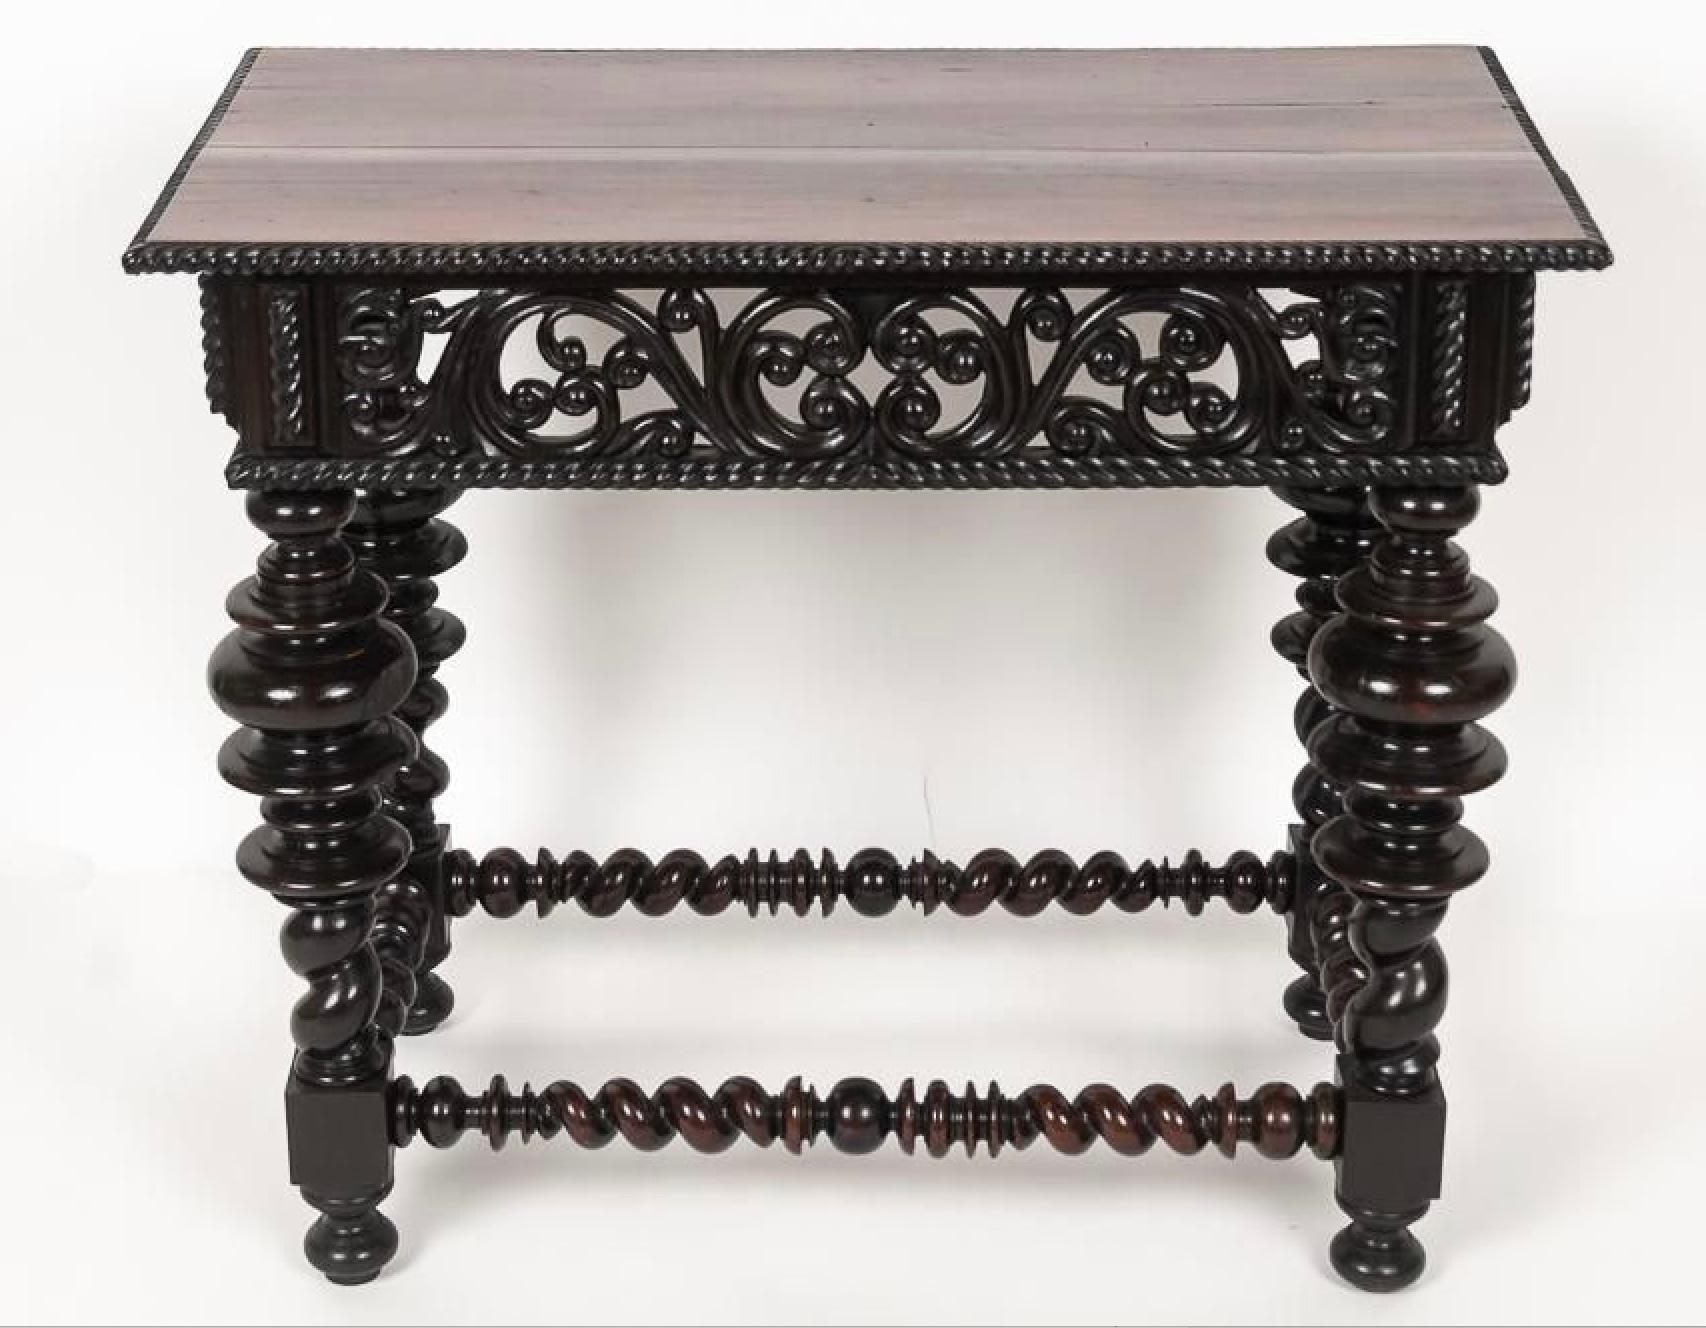 Age: 1800 - 1850

Furniture Style: Portugese

Overall Dimensions: Width - 36